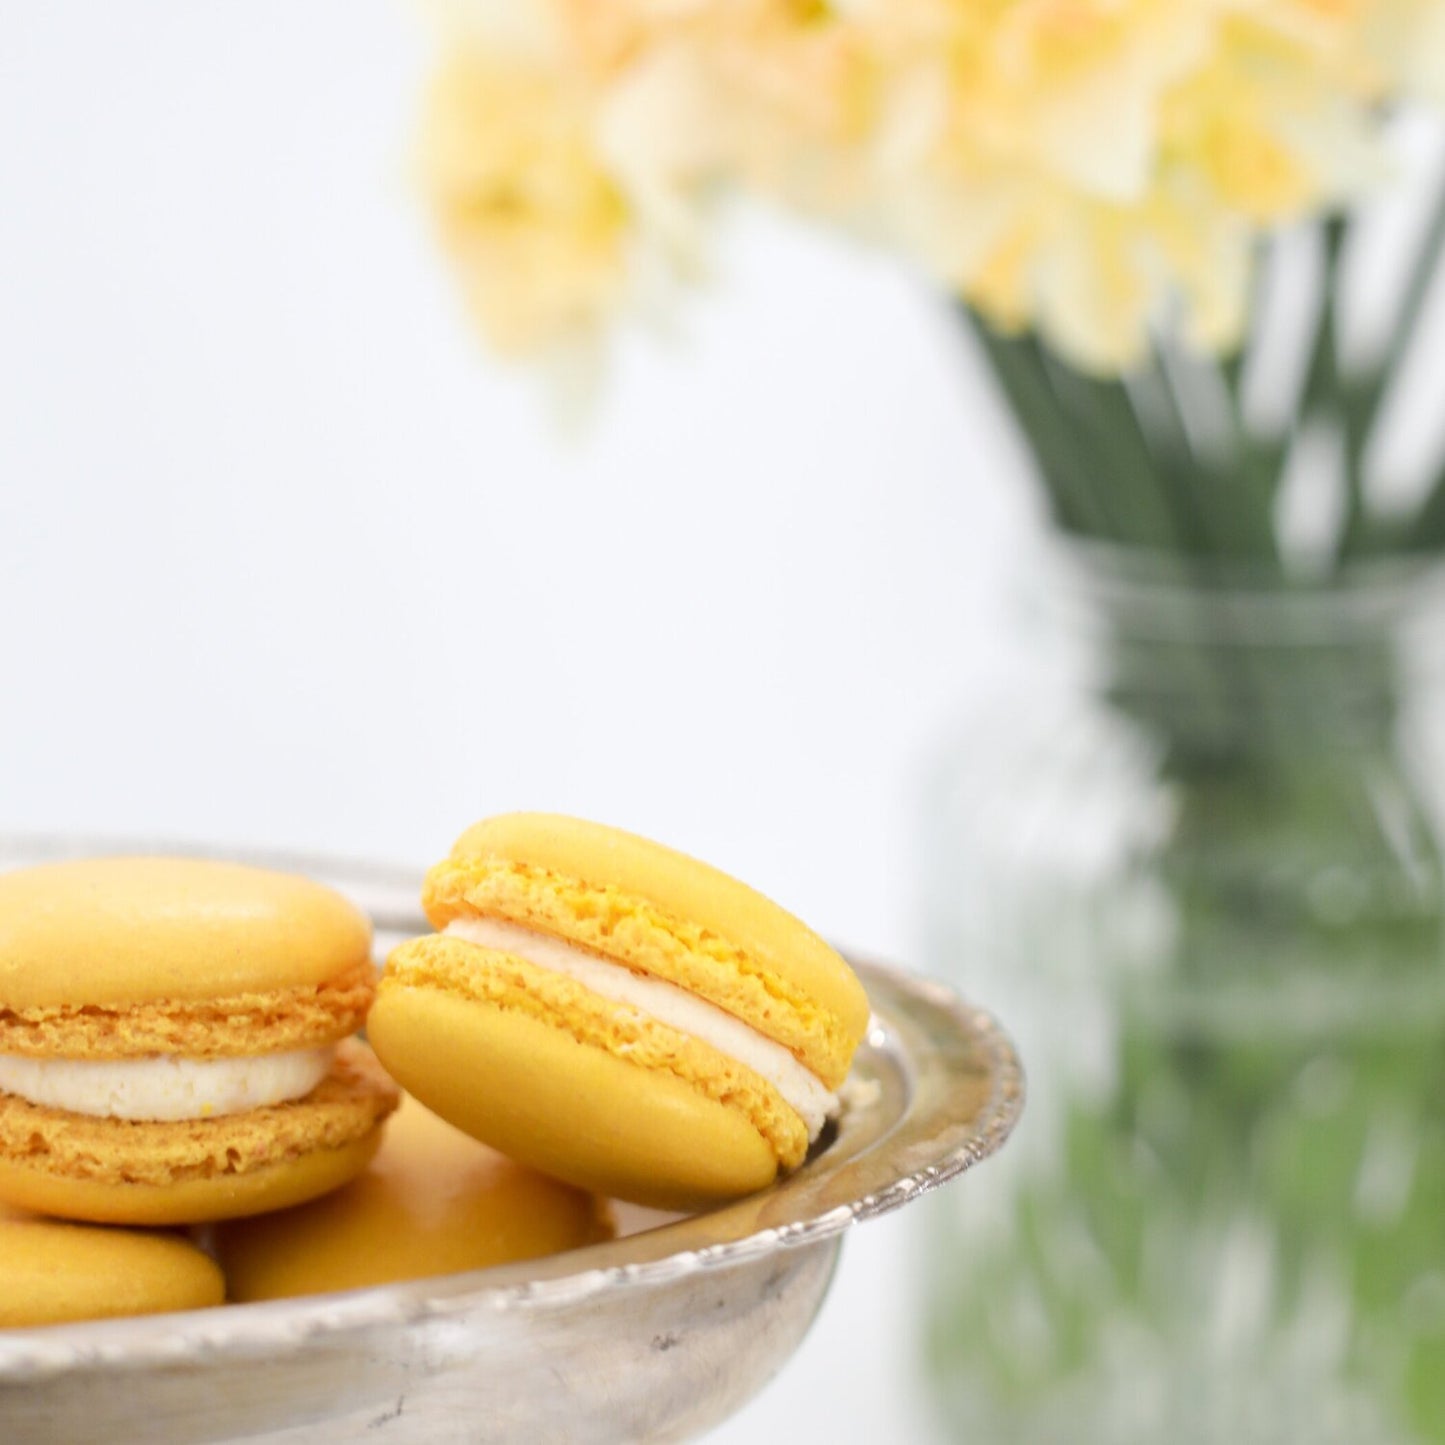 Lemon Macarons ready for delivery in Christchurch New Zealand